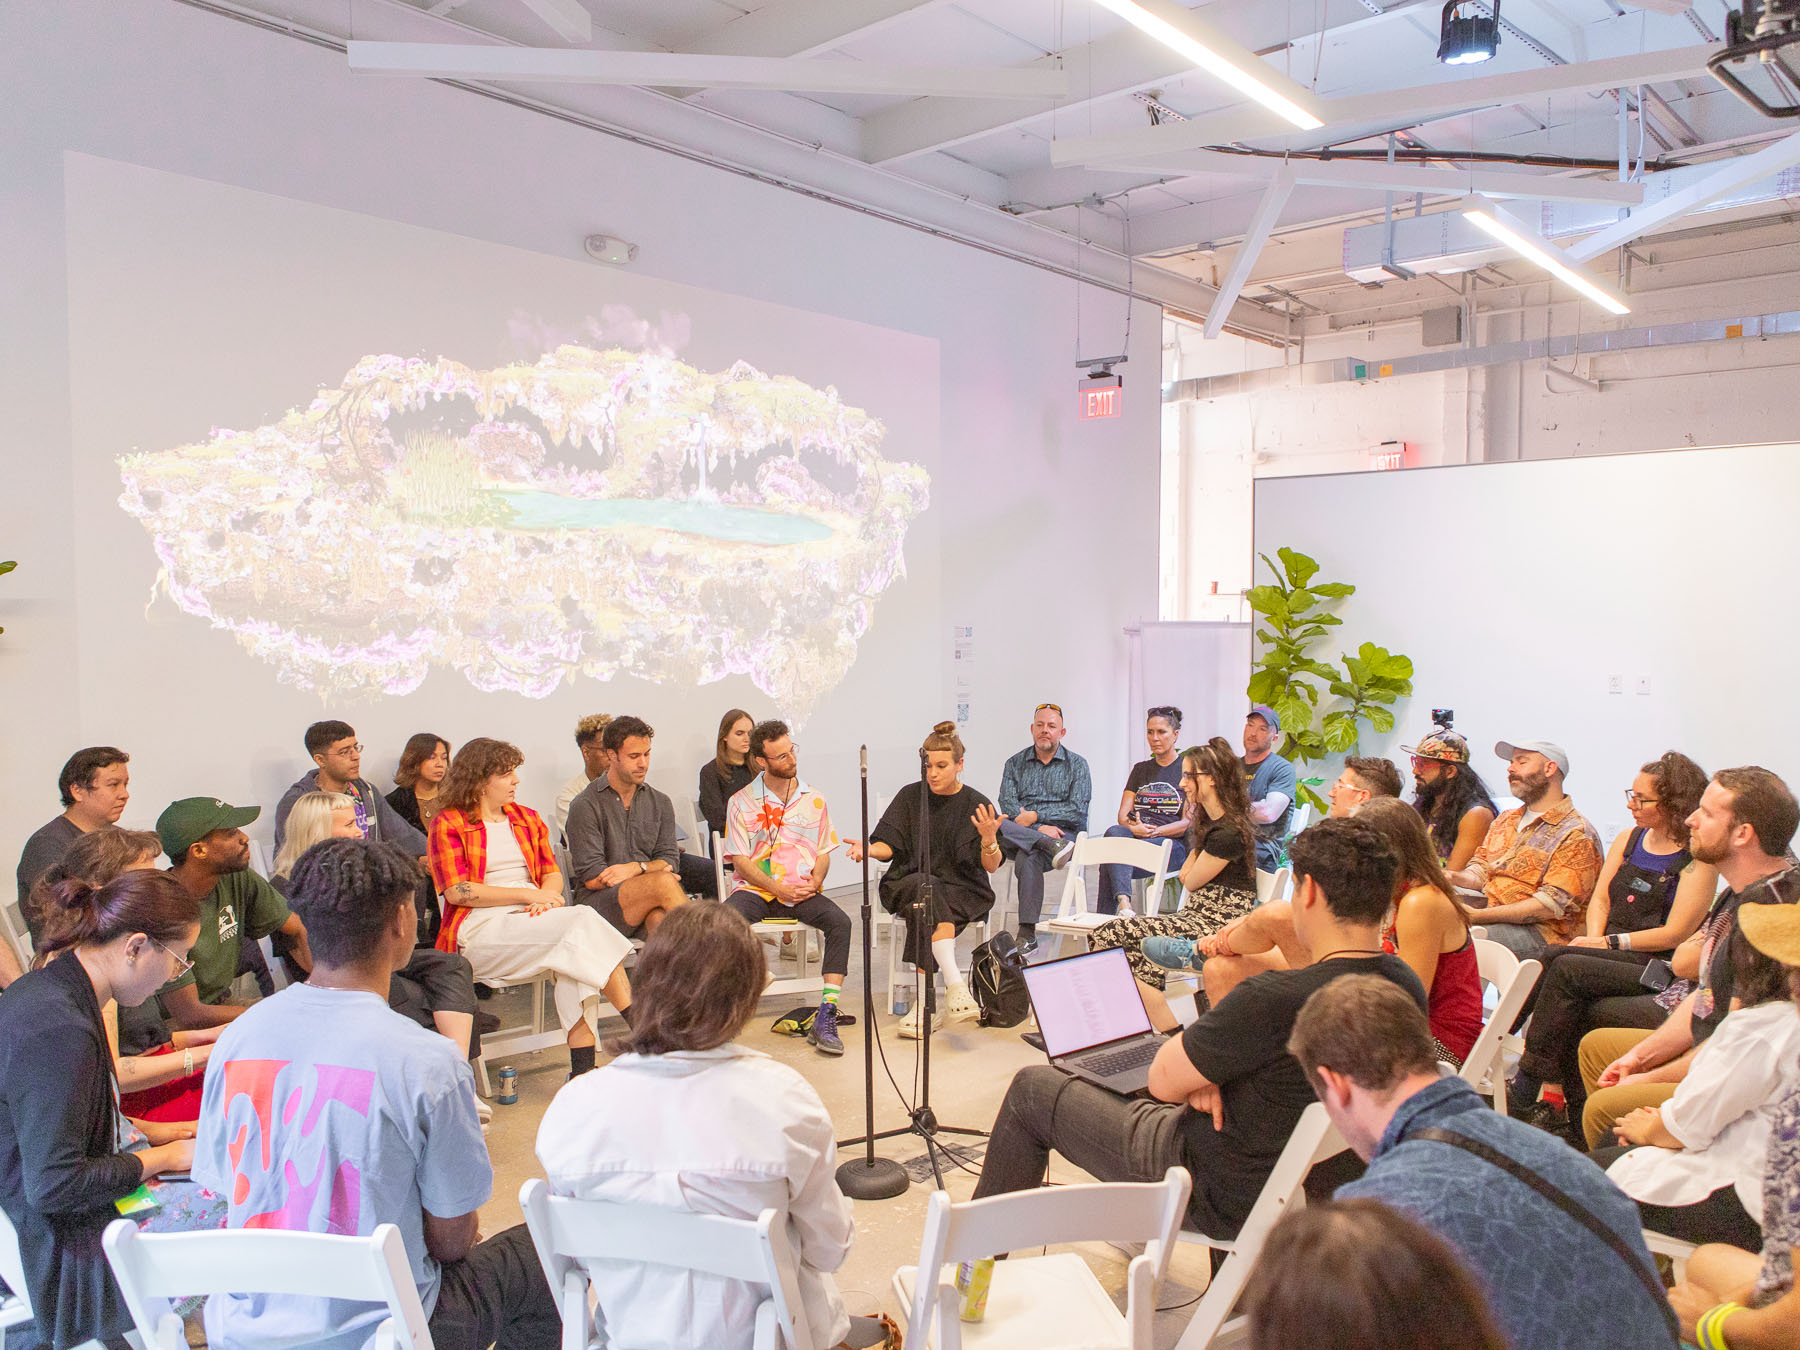 People sit in a circle of white folding chairs, listening to a person seated in the middle who is speaking and gesticulating. Digital art is projected on one of the walls